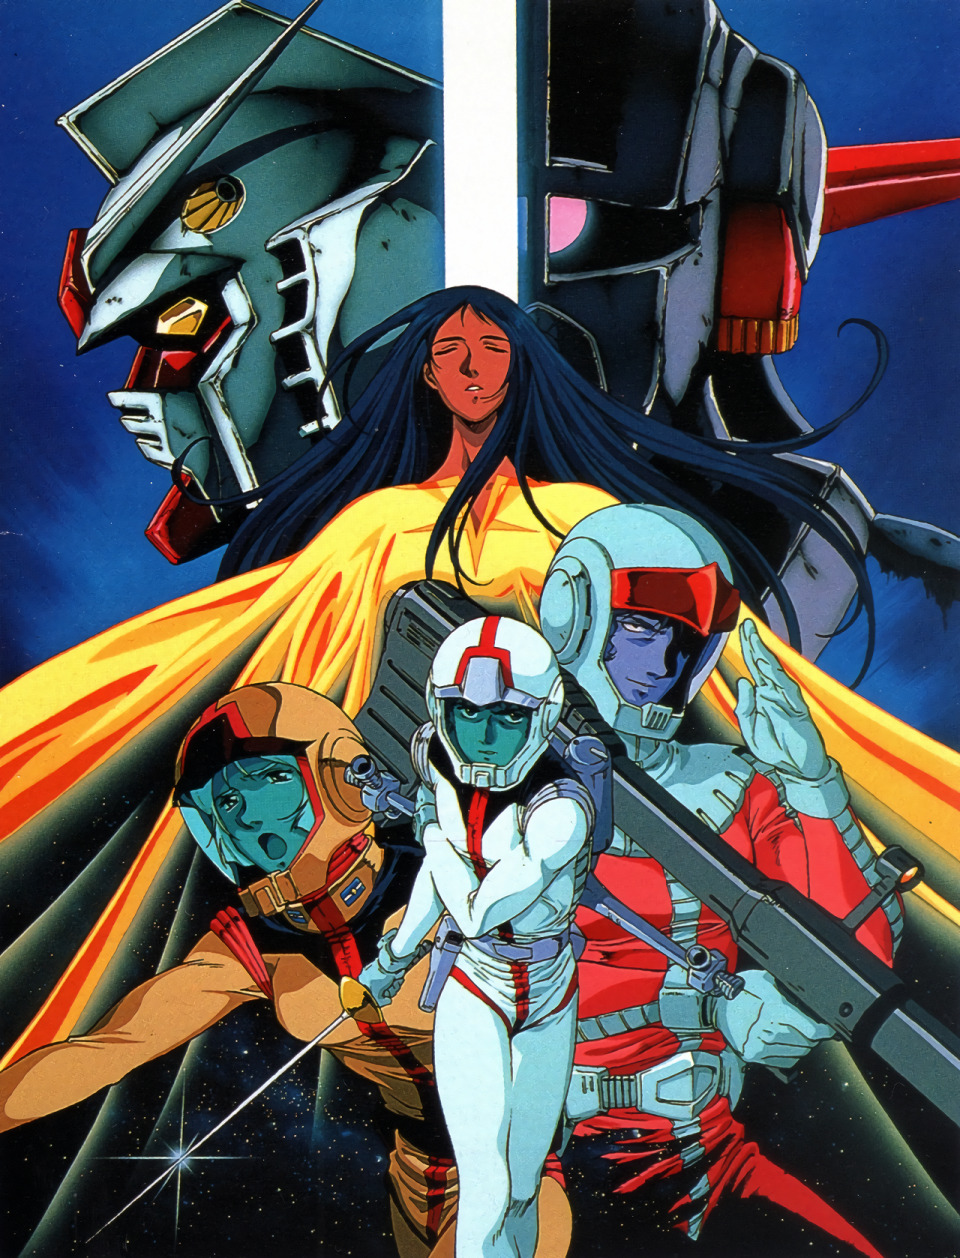 1990s_(style) 1999 aged_up amuro_ray animedia artist_request bazooka_(gundam) char_aznable closed_eyes damaged dark_skin dirty dress earth_federation gloves gundam helmet highres holding_own_arm injury lalah_sune long_hair magazine_scan mecha mobile_armor mobile_suit mobile_suit_gundam official_art pilot_suit promotional_art retro_artstyle robot rx-78-2 salute sayla_mass scan science_fiction space spacesuit spoilers starry_background sword traditional_media upper_body v-fin weapon zeon zeong